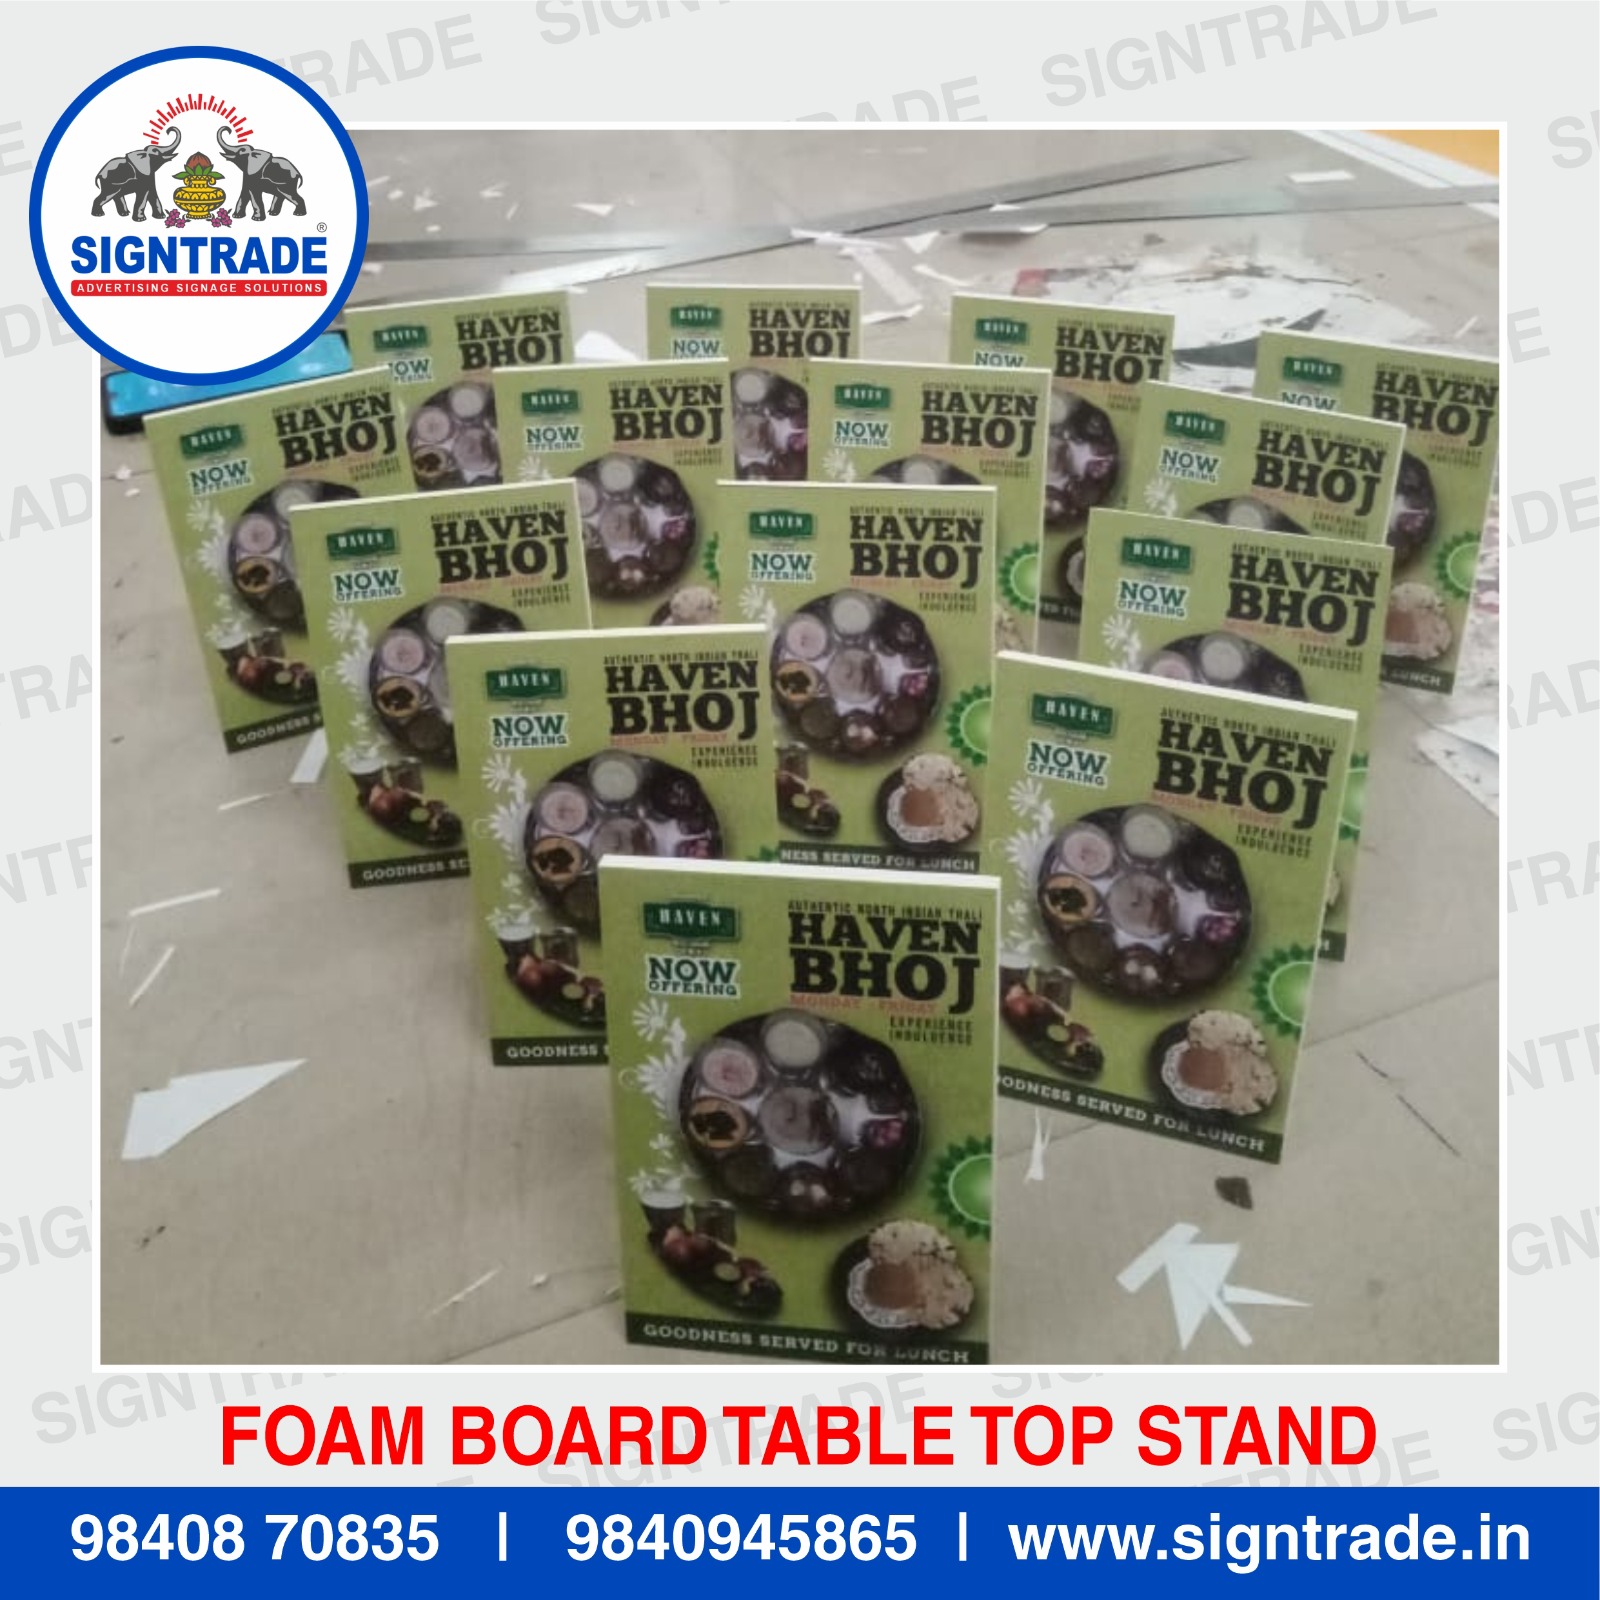 Foam Table Top Stand in Chennai